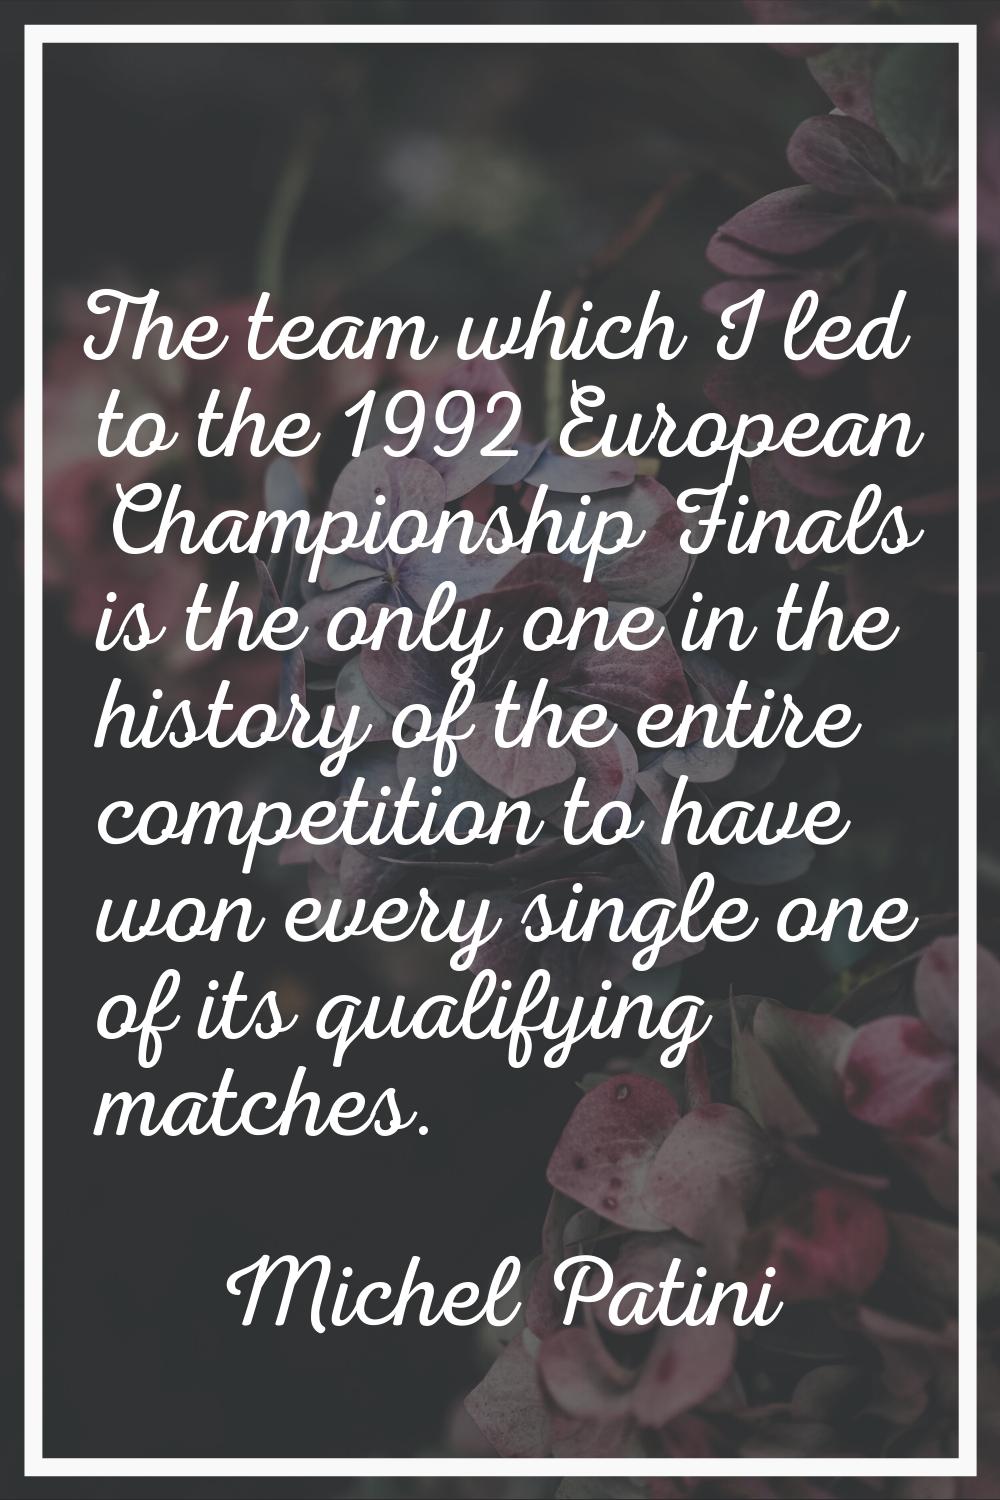 The team which I led to the 1992 European Championship Finals is the only one in the history of the